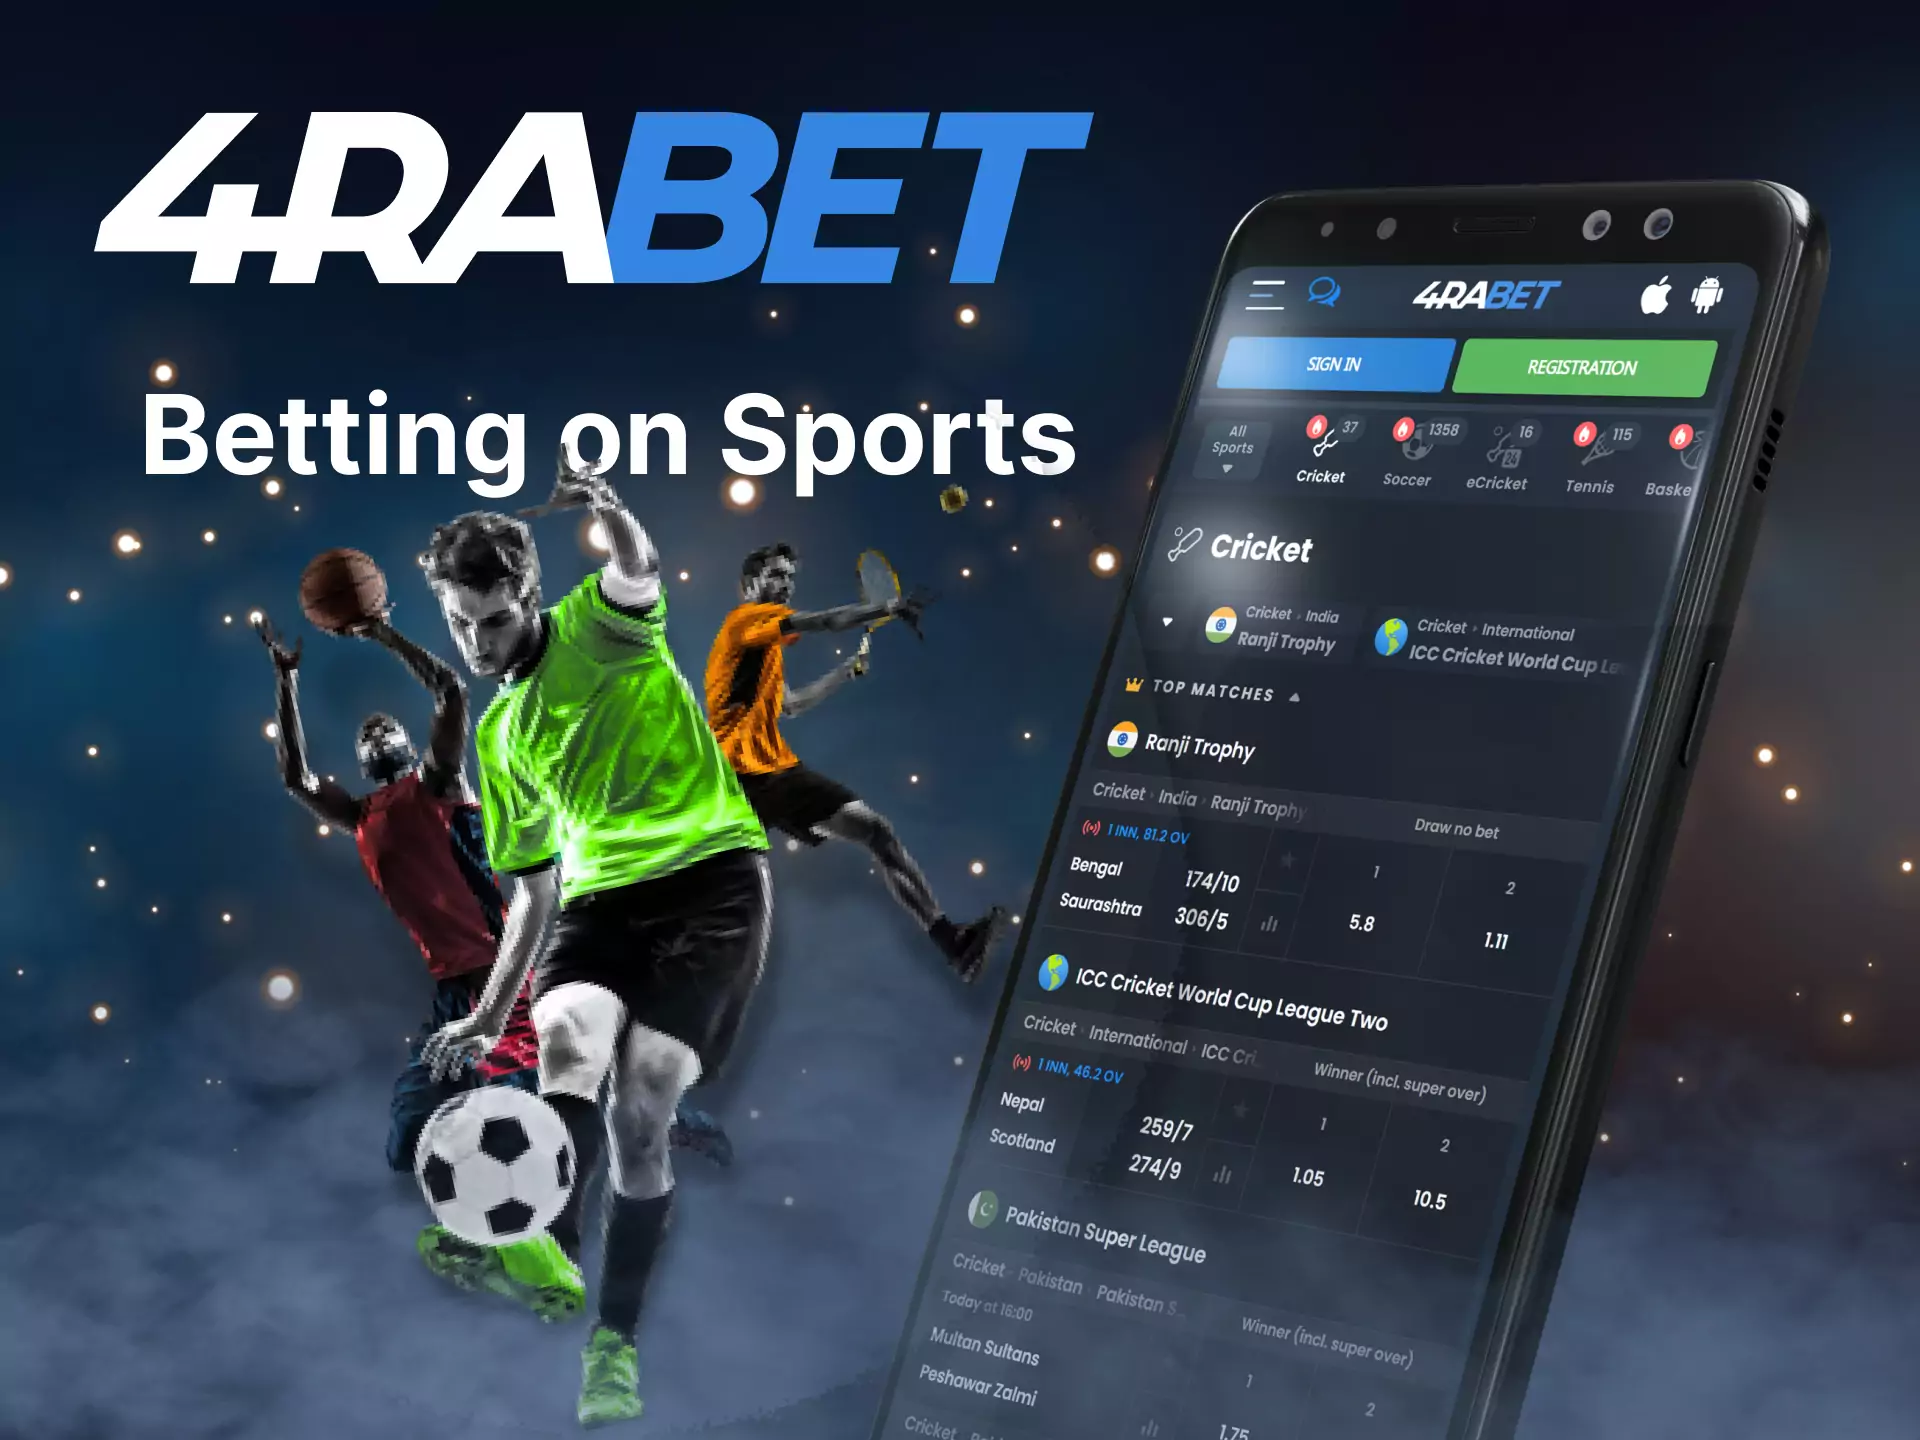 In the 4rabet mobile app, bet on your favorite sports.